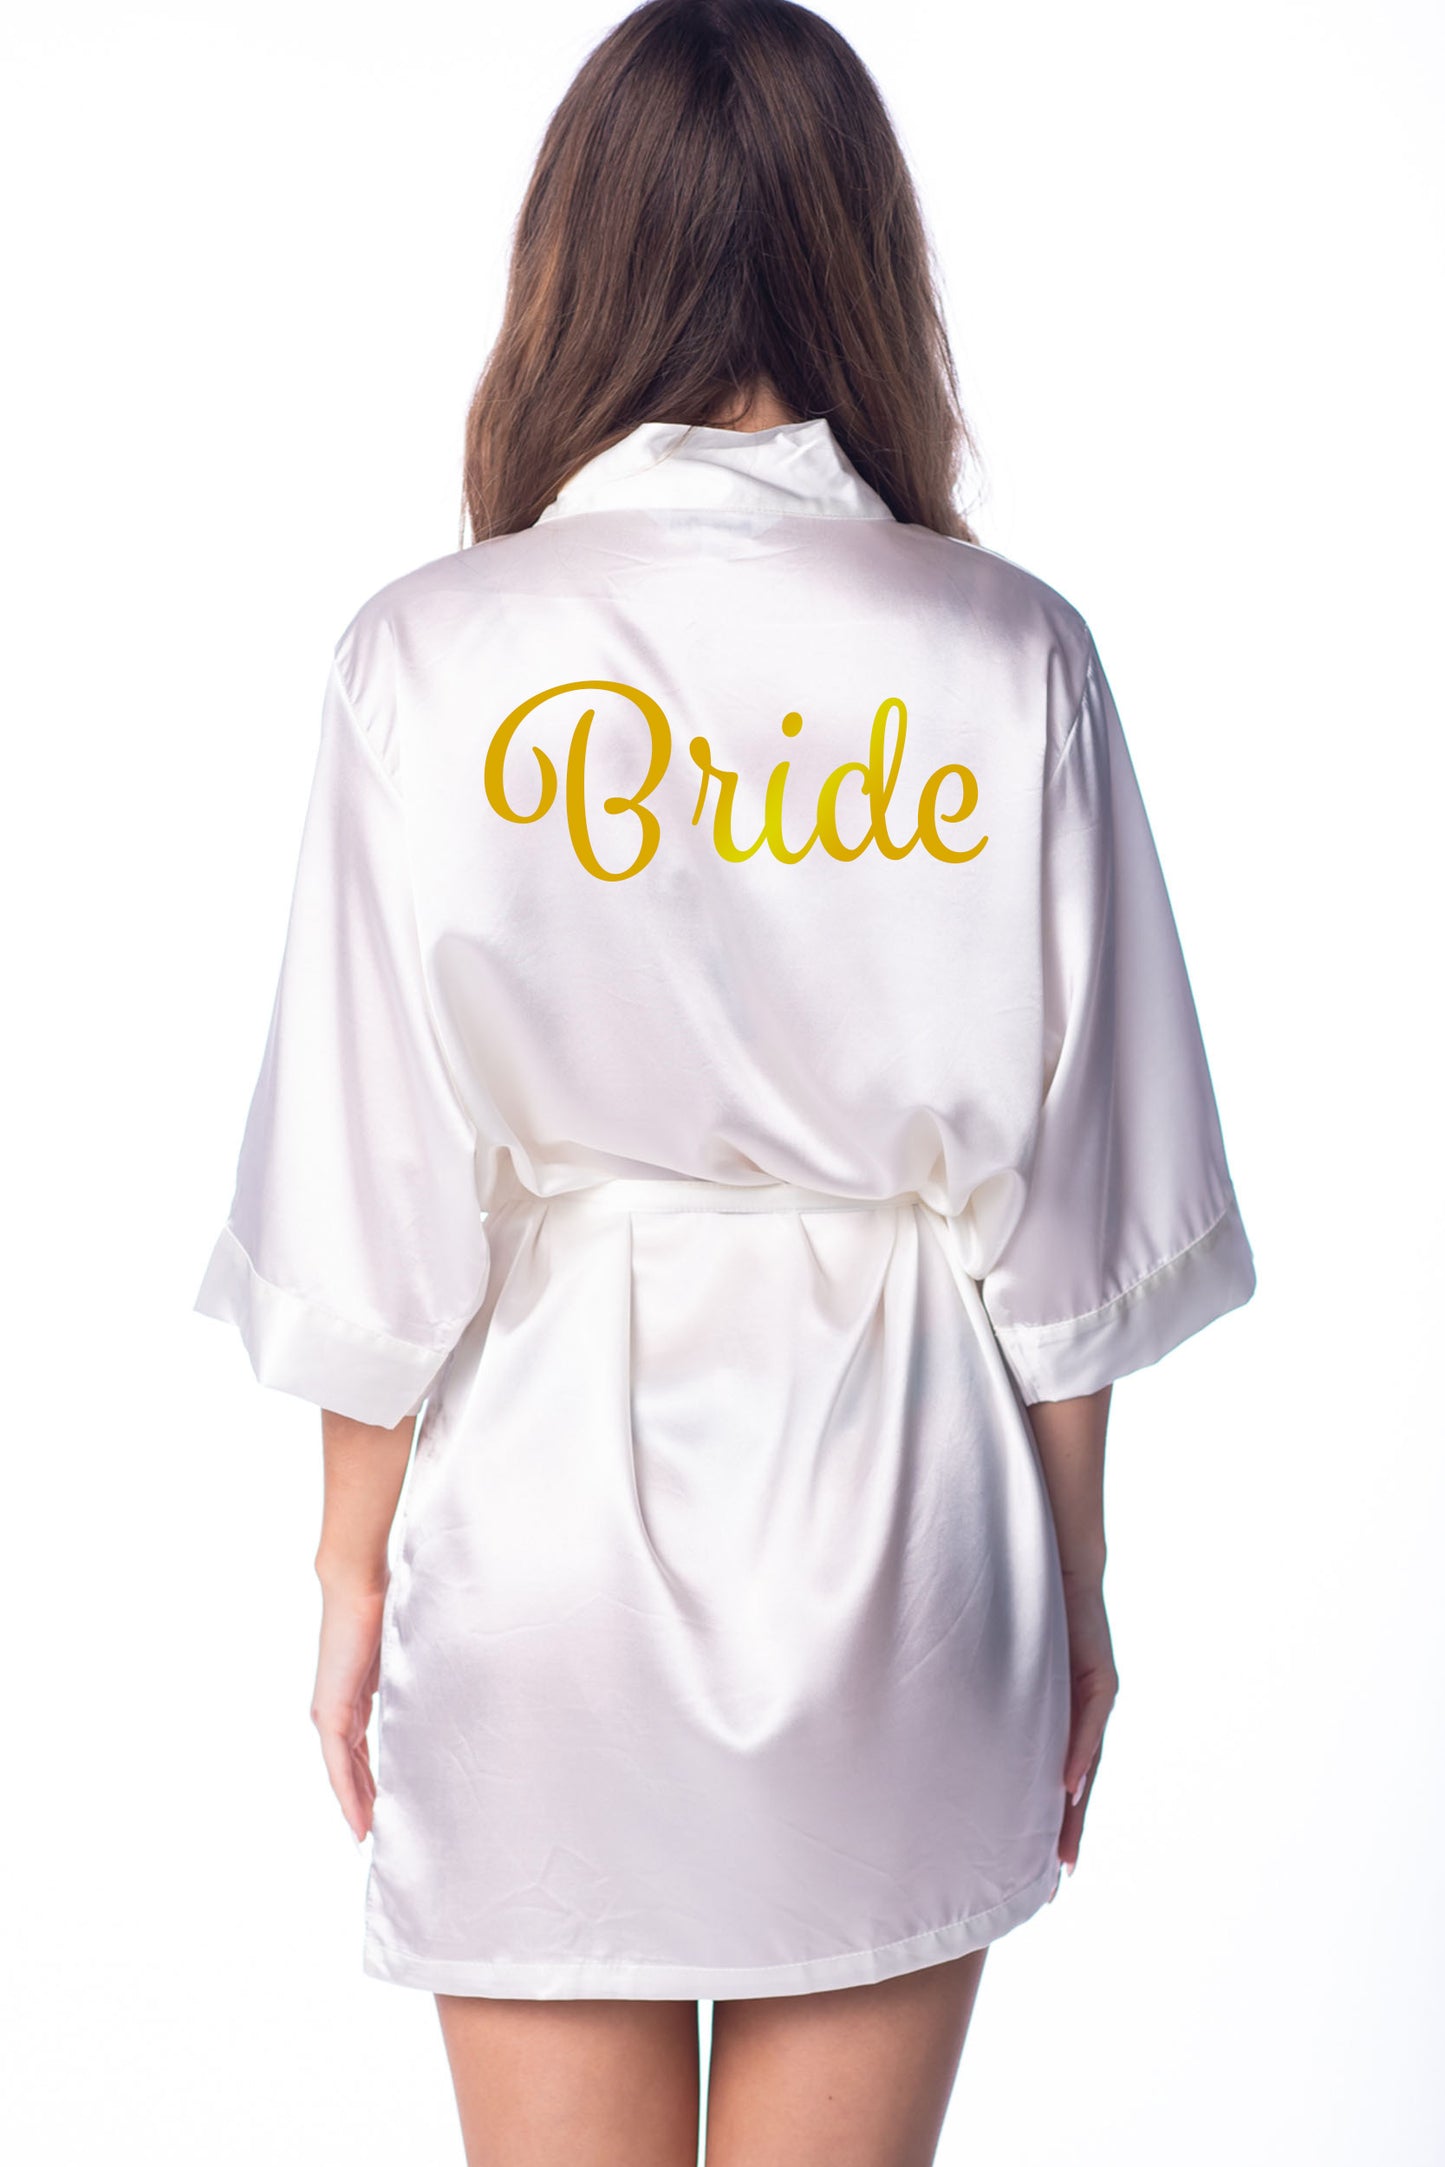 L/XL "Bride" Ivory Satin Robe - Spumante in Metal Gold (Clearance Item)